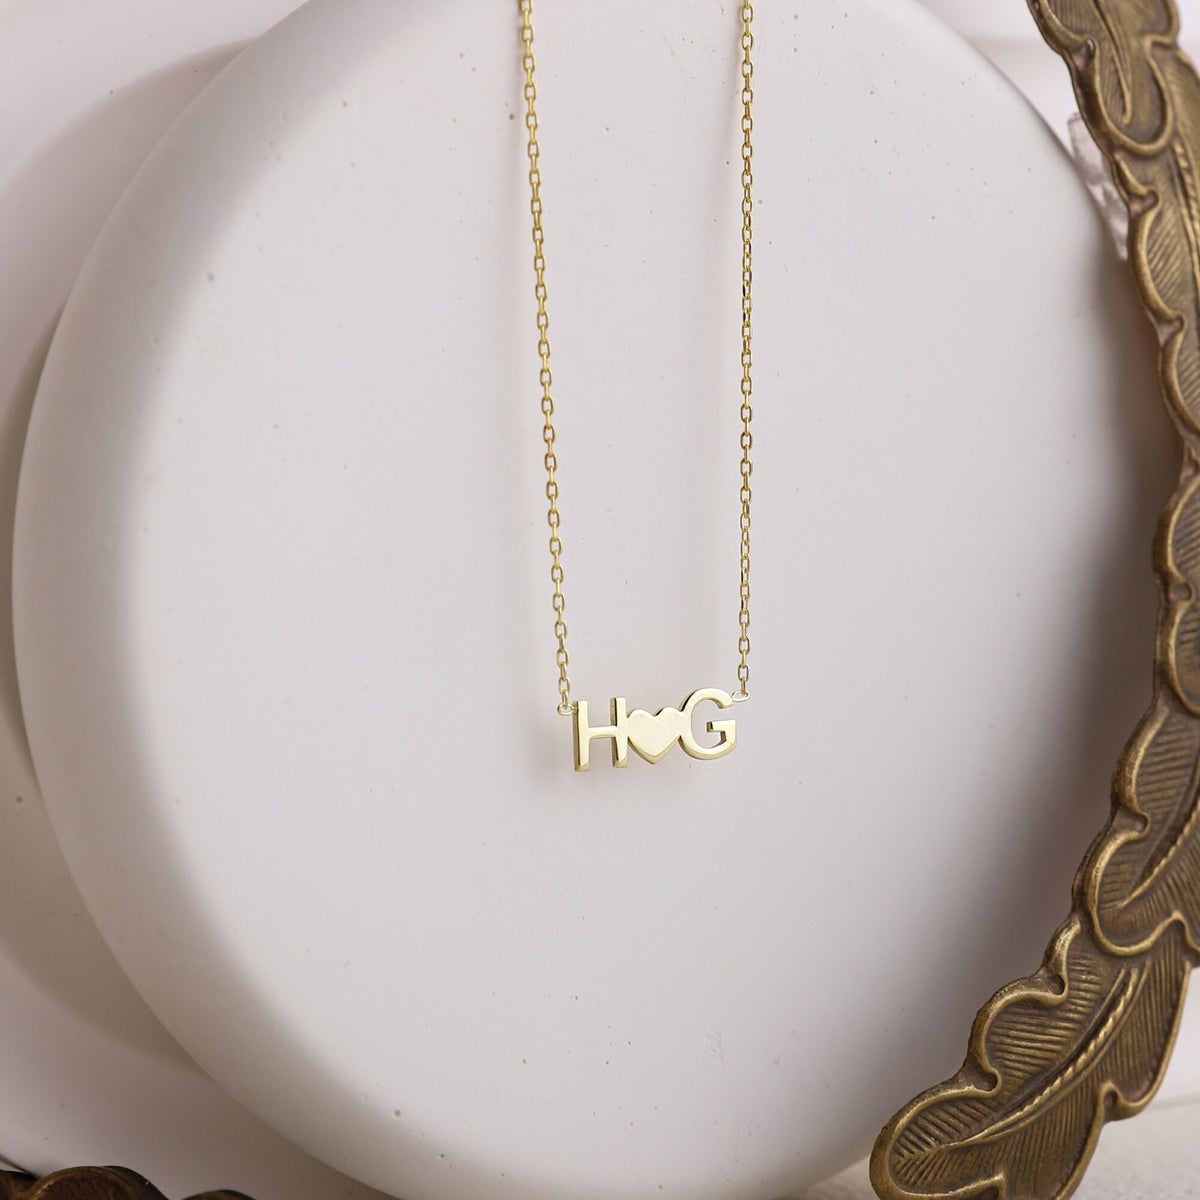 Necklaces for Women Custom Heart Initial Necklace with Birthstone add on | Dainty Couple Letter Necklace for Her, Delicate Necklace Gifts